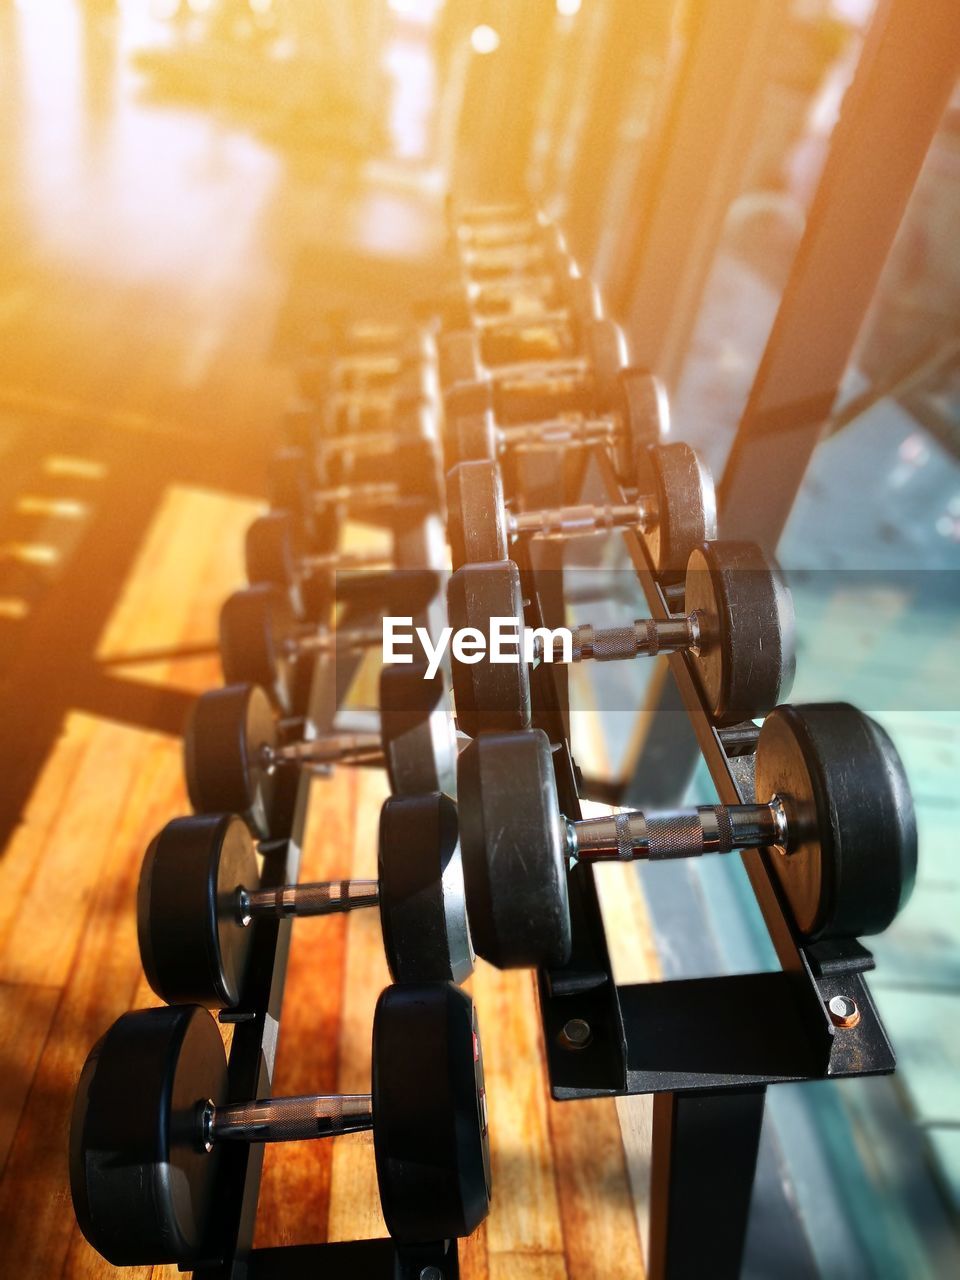 High angle view of dumbbells on rack in gym